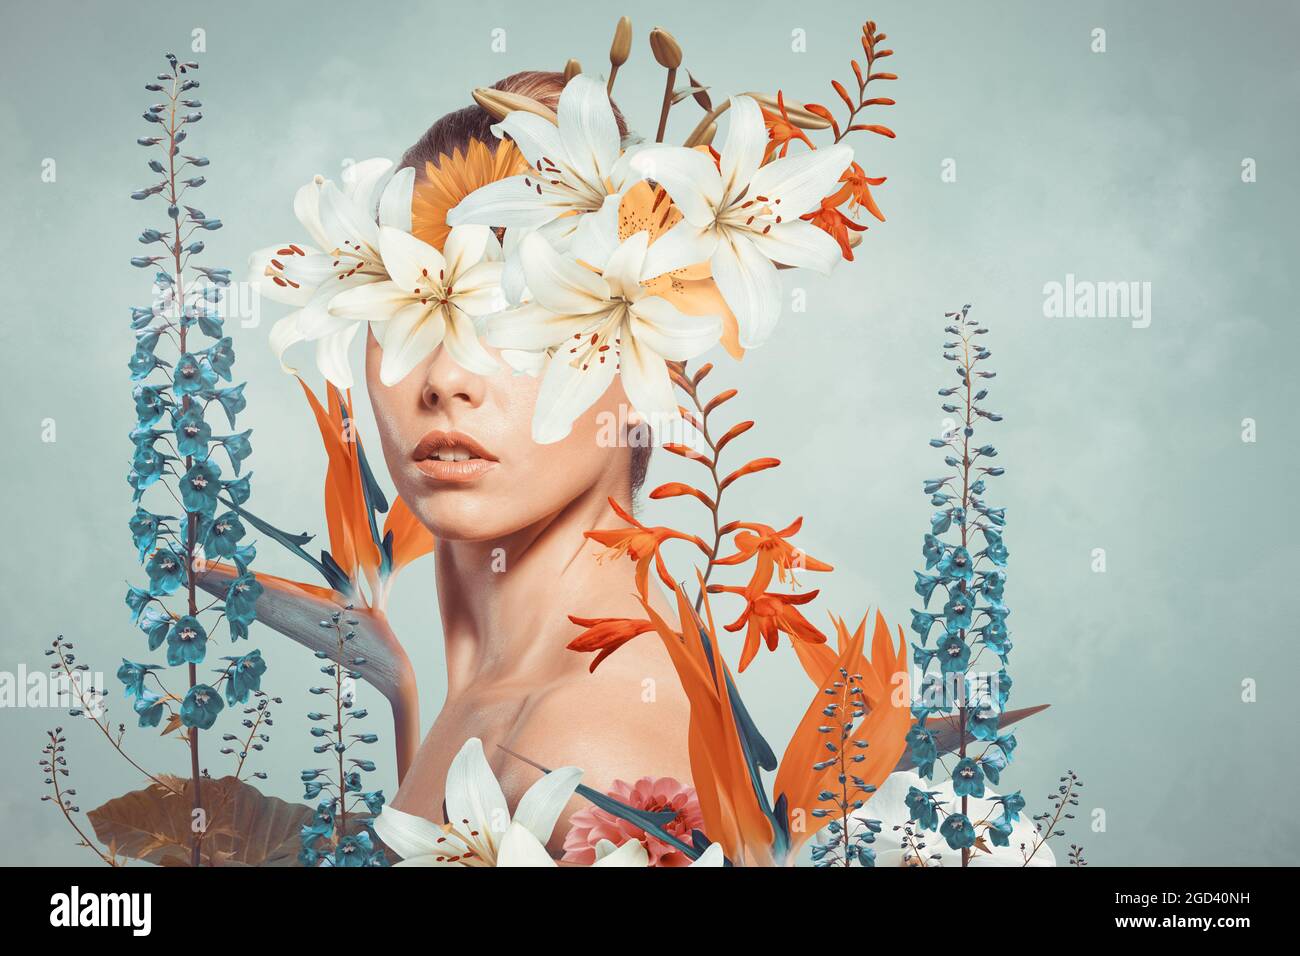 Abstract contemporary art collage portrait of young woman with flowers on face hides her eyes Stock Photo